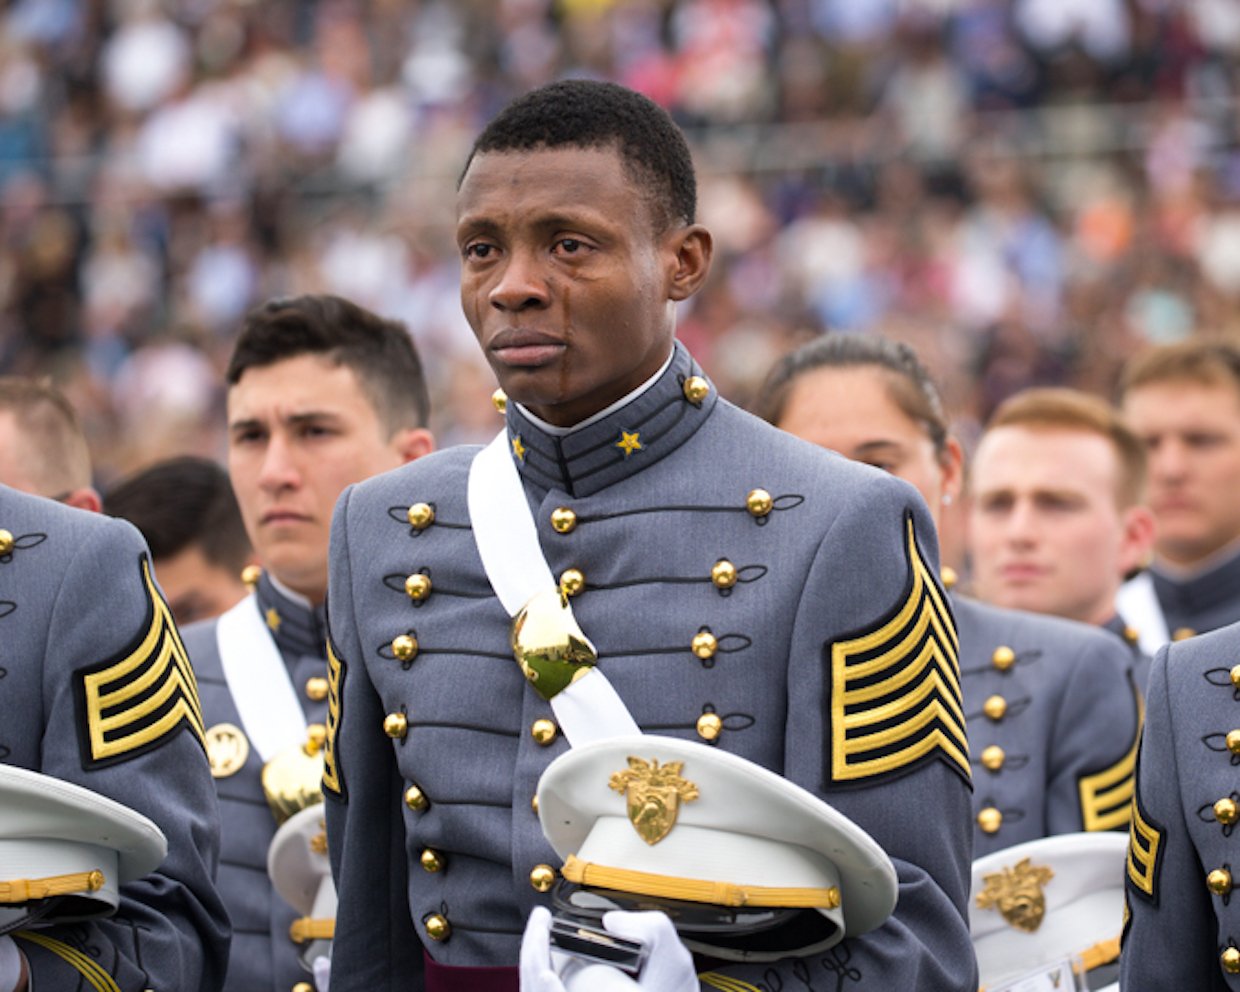 Cadet Alix Idrache sheds tears of joy during the commencement for the US Military Academy's class of 2016 at Michie Stadium in West Point, New York, on May 21.